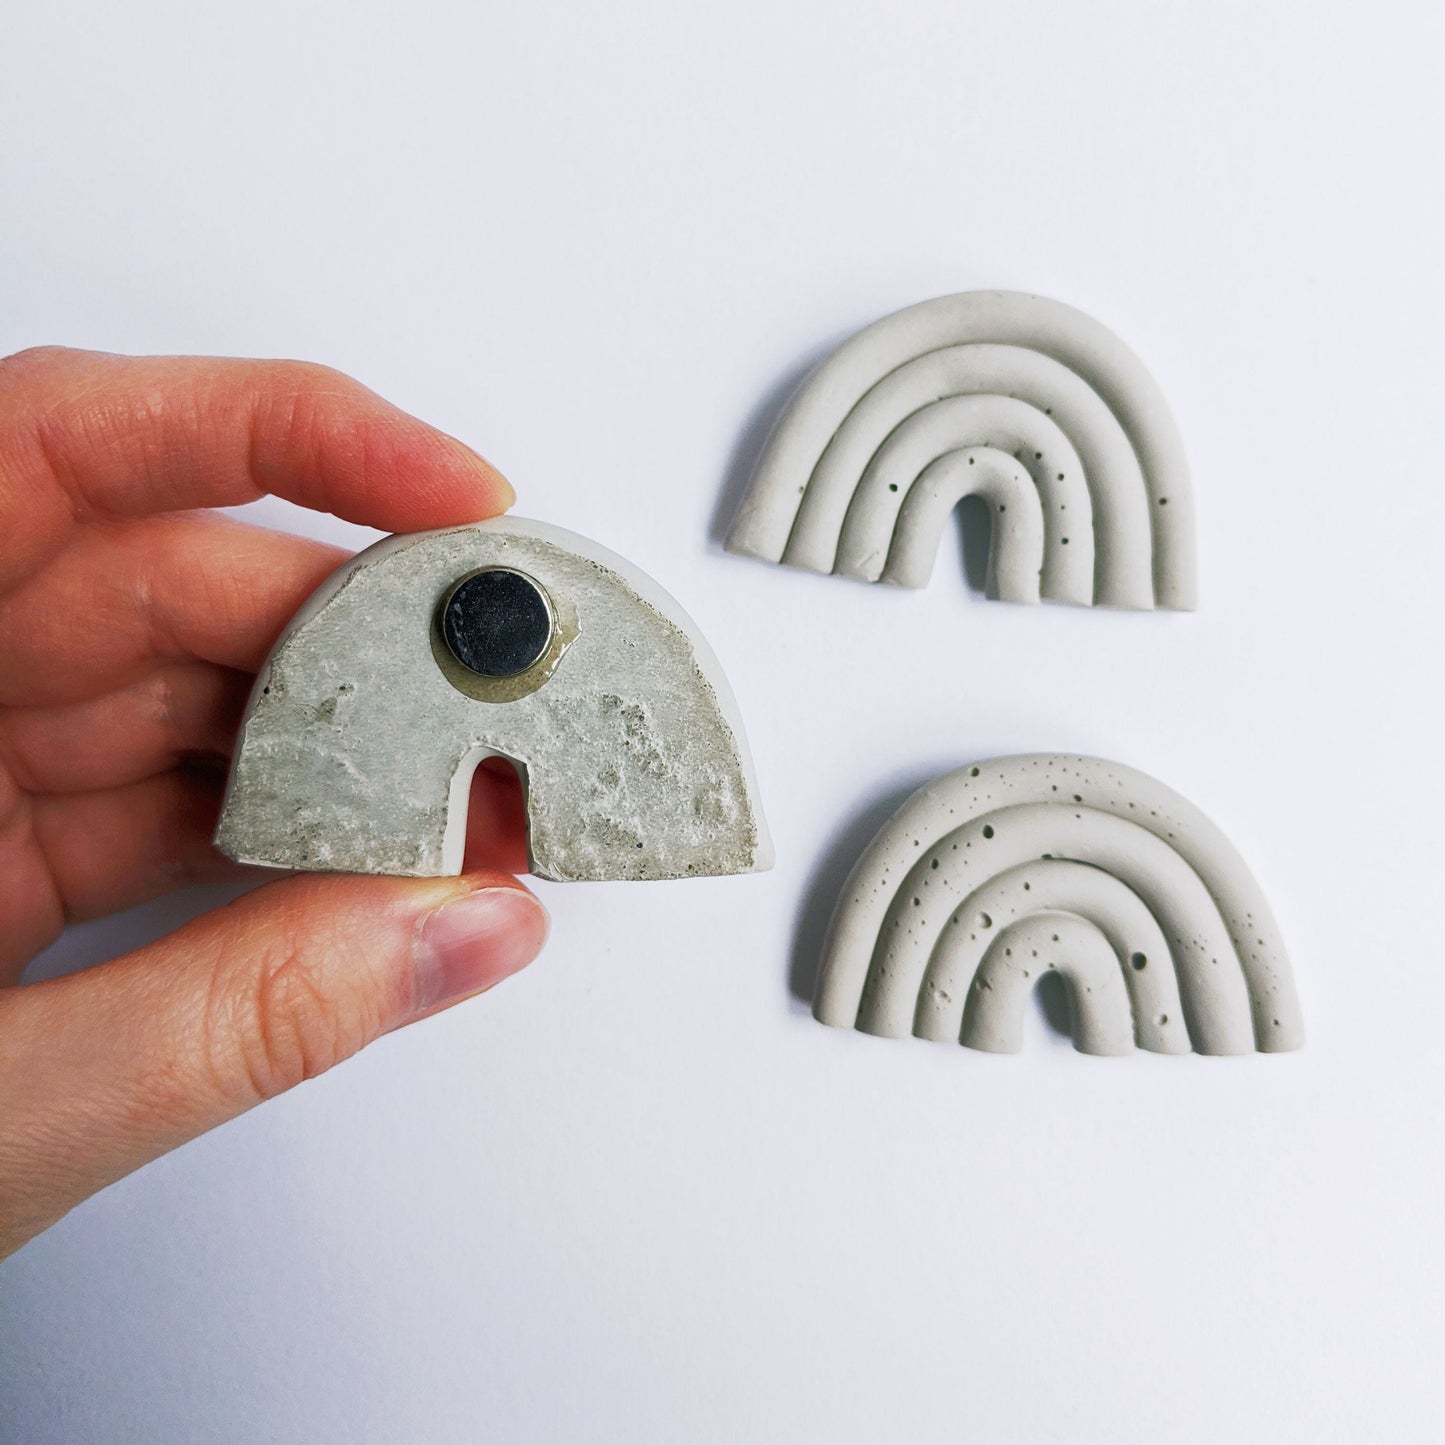 Rainbow Concrete Magnets. Monochrome Rainbow Fridge Magnets. Modern Home Office Magnets. Gifts under 20. Set of 3 Magnets.